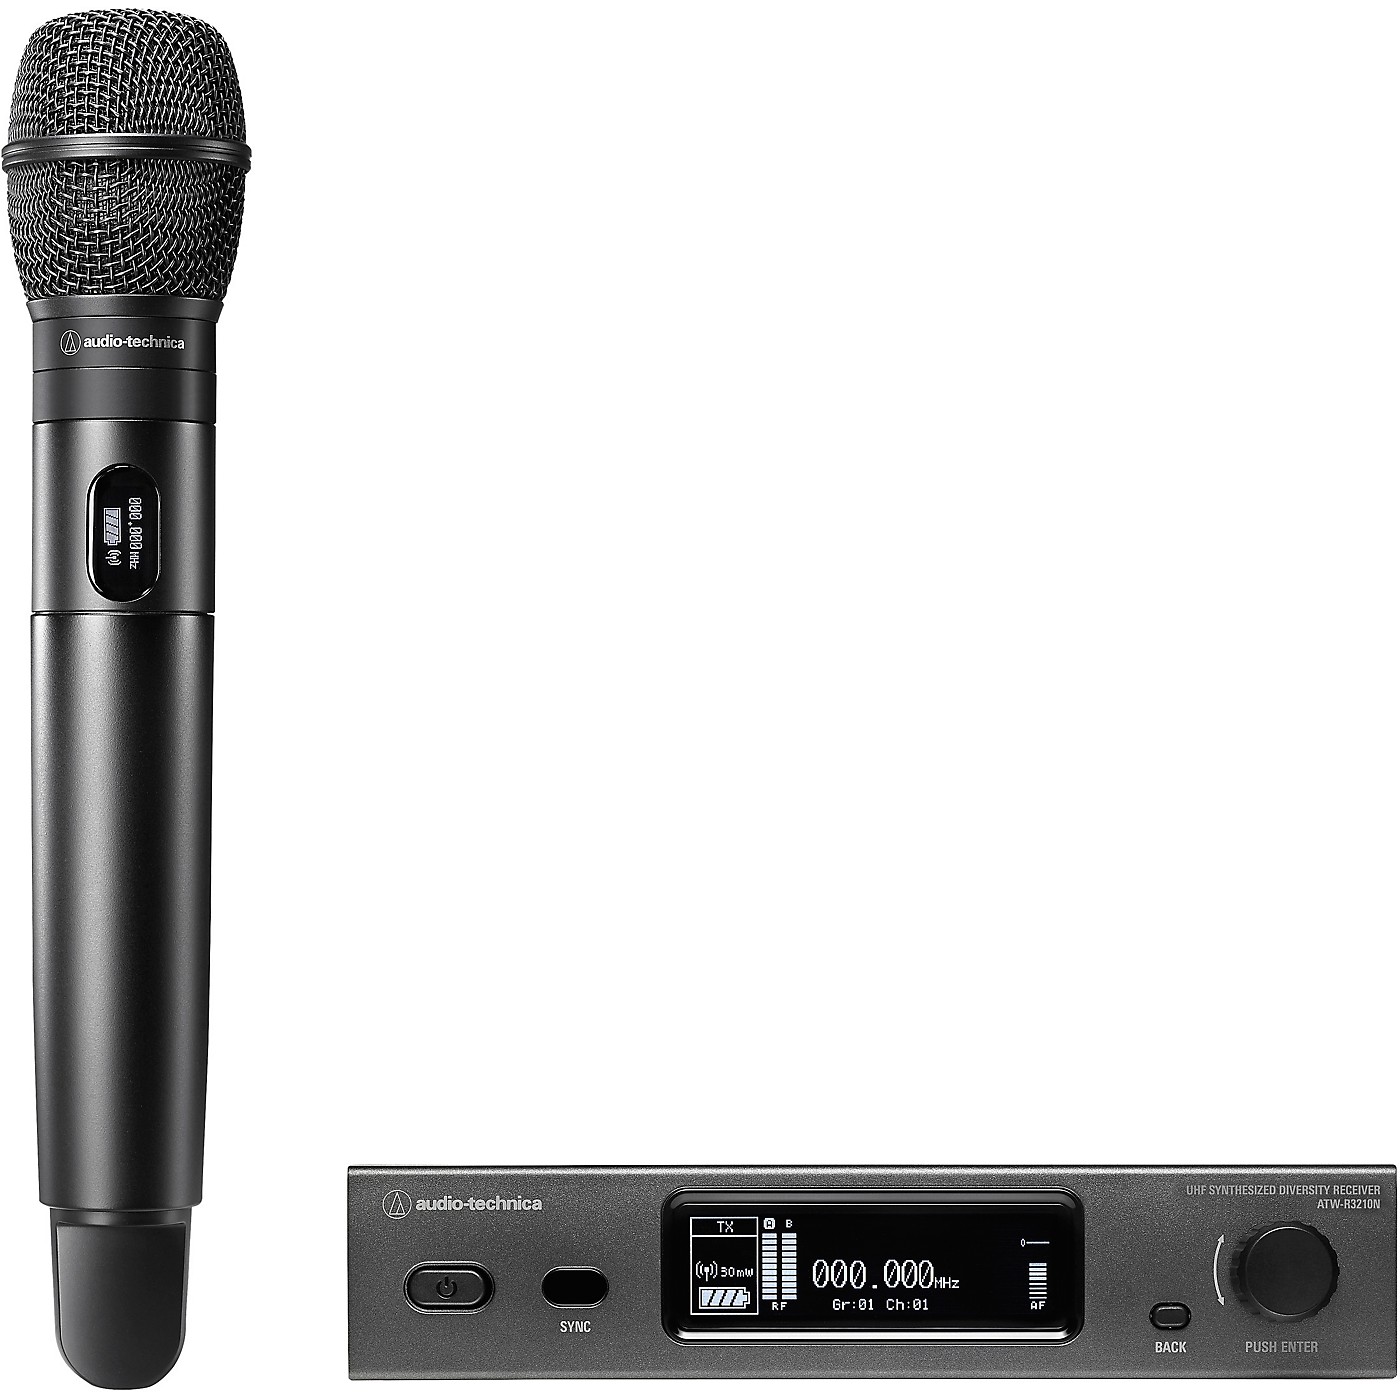 Audio-Technica 3000 Series (4th Gen) Network Enabled UHF Wireless with ATW-C710 Cardioid Dynamic Microphone Capsule thumbnail